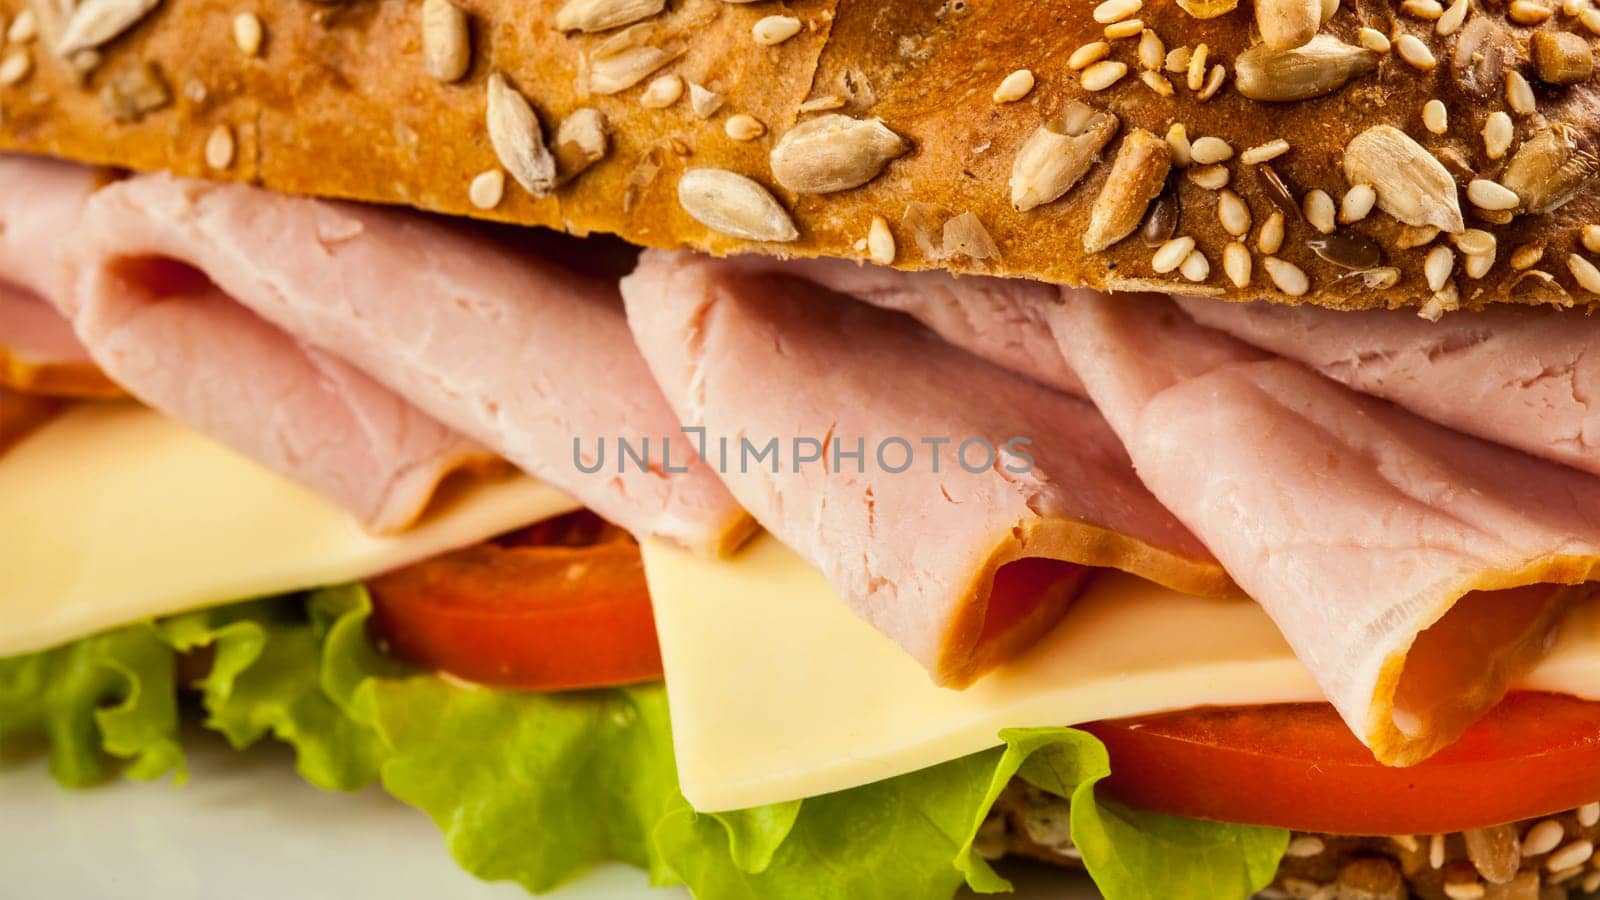 Panorama of ham sandwich with lettuce, cheese, tomato close up